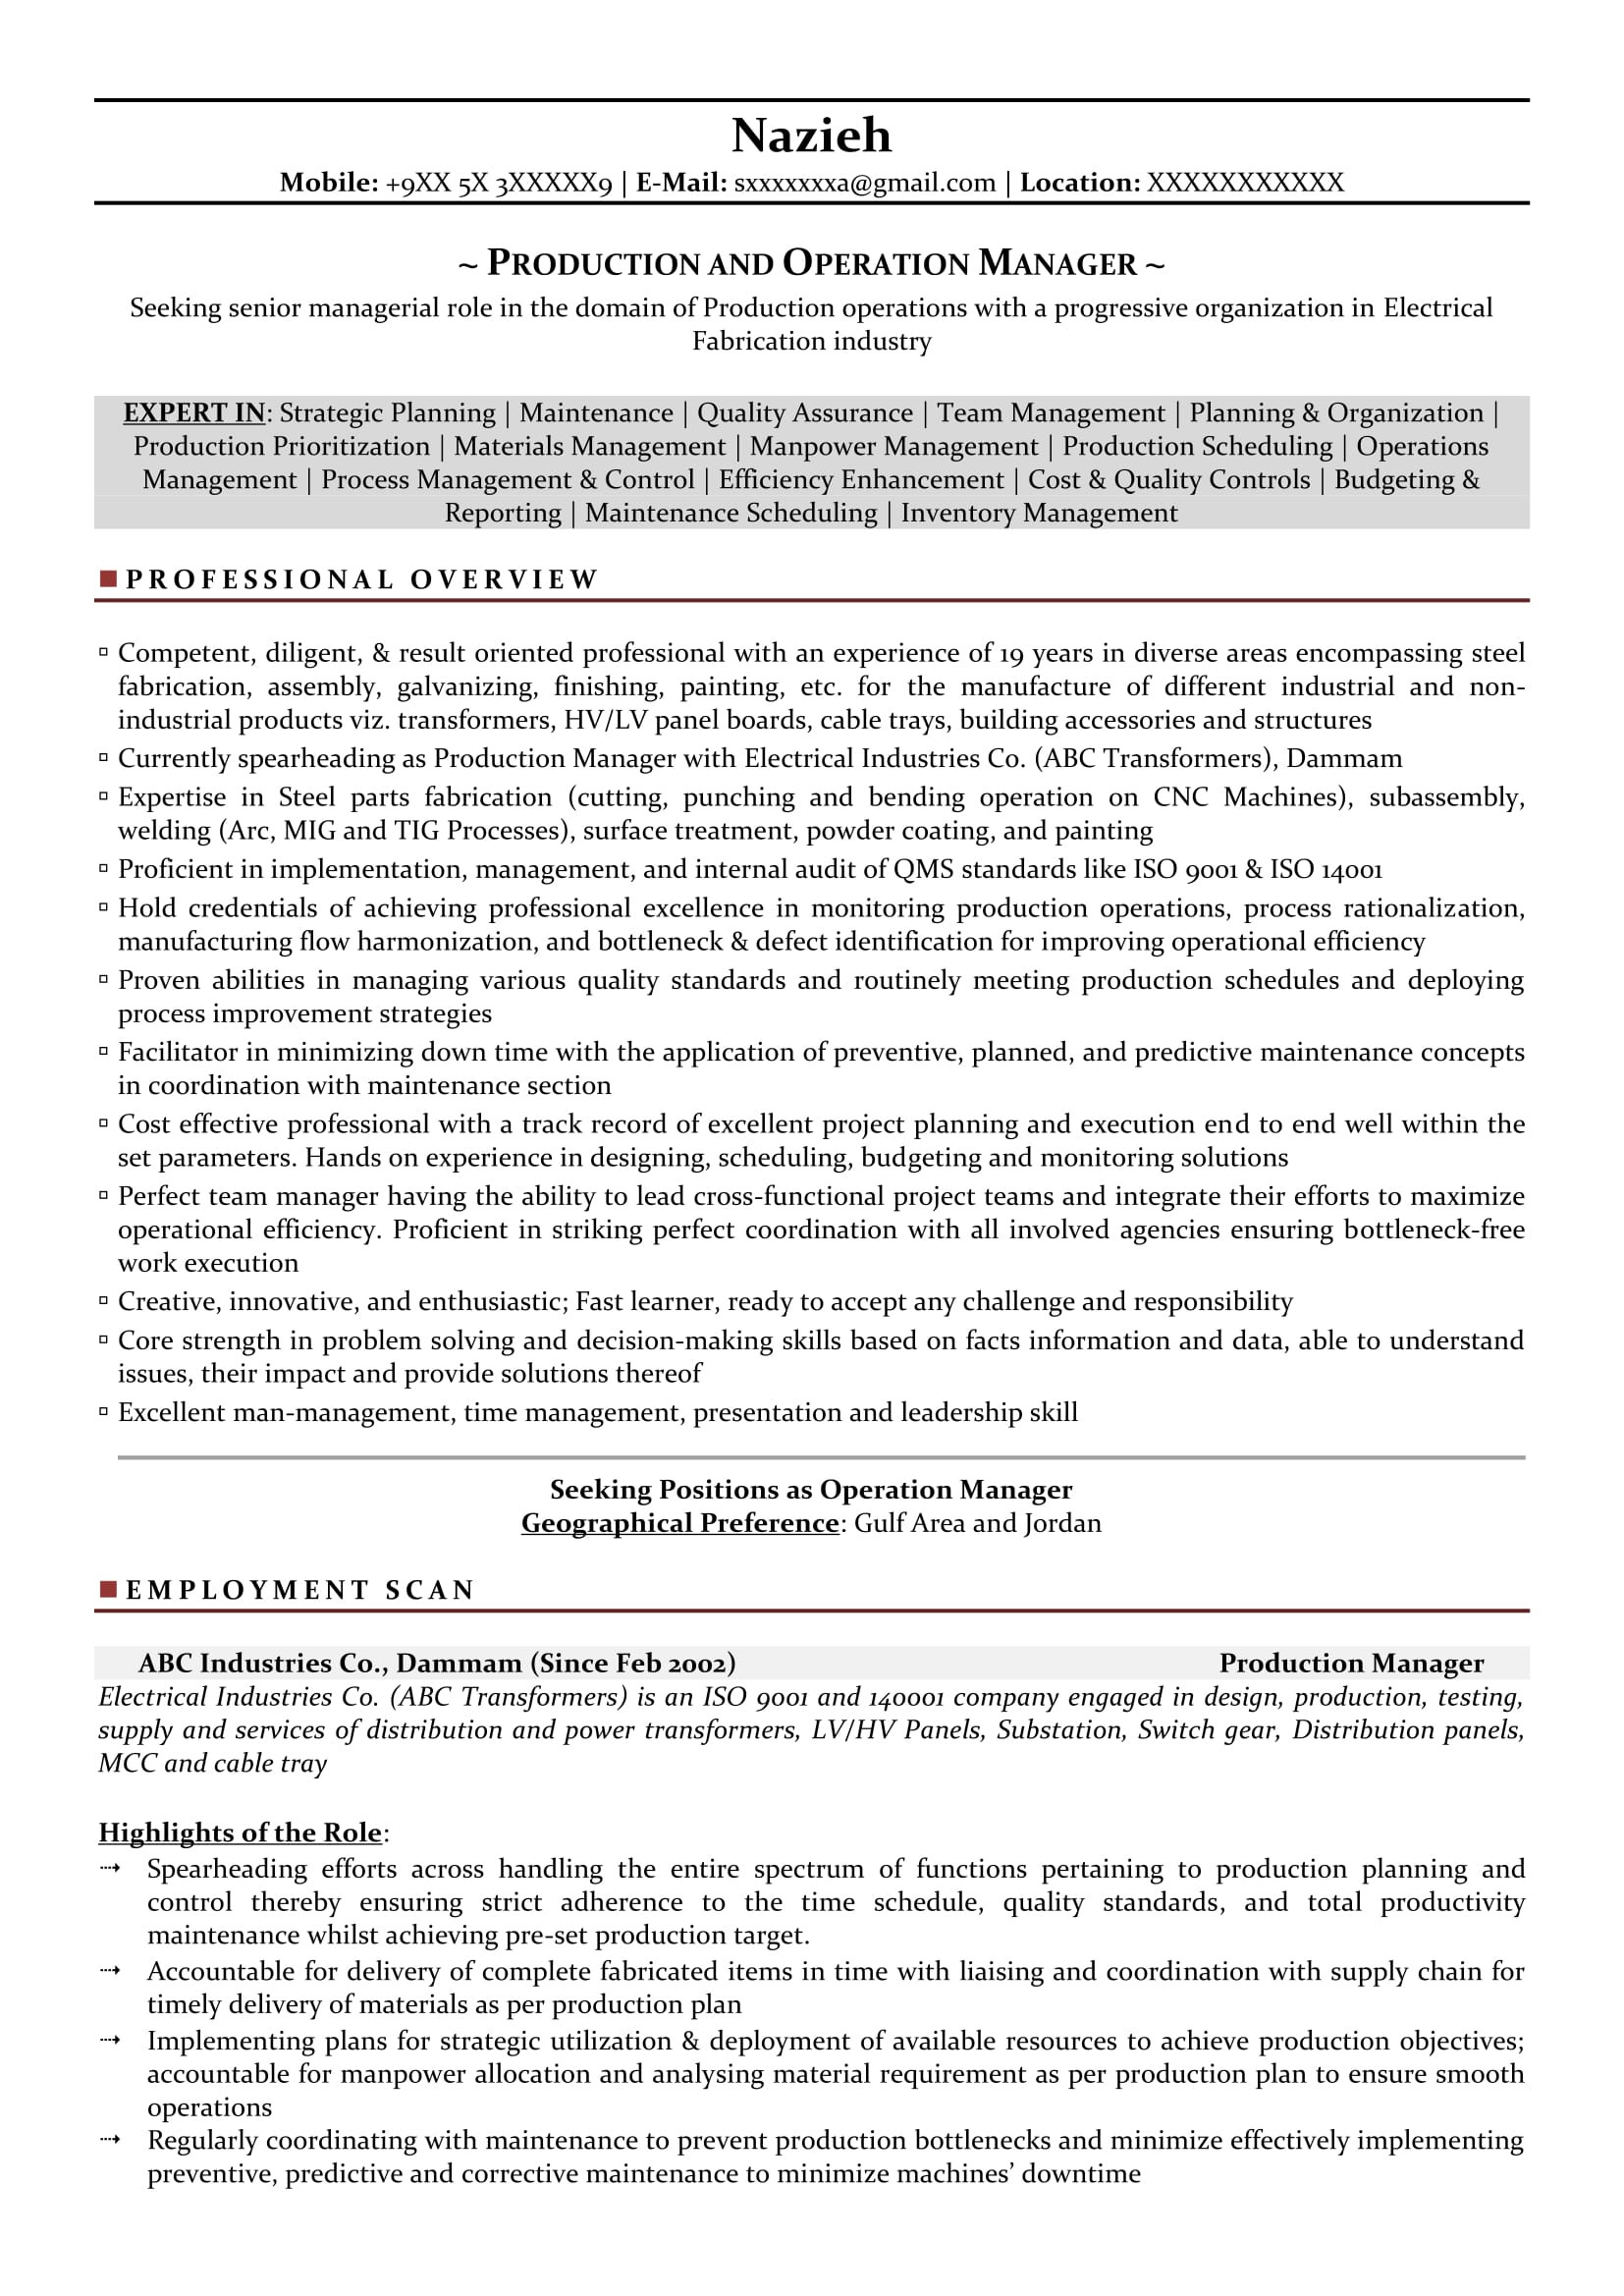 Production Planning and Control Manager Resume Samples Production Manager Sample Resumes, Download Resume format Templates!